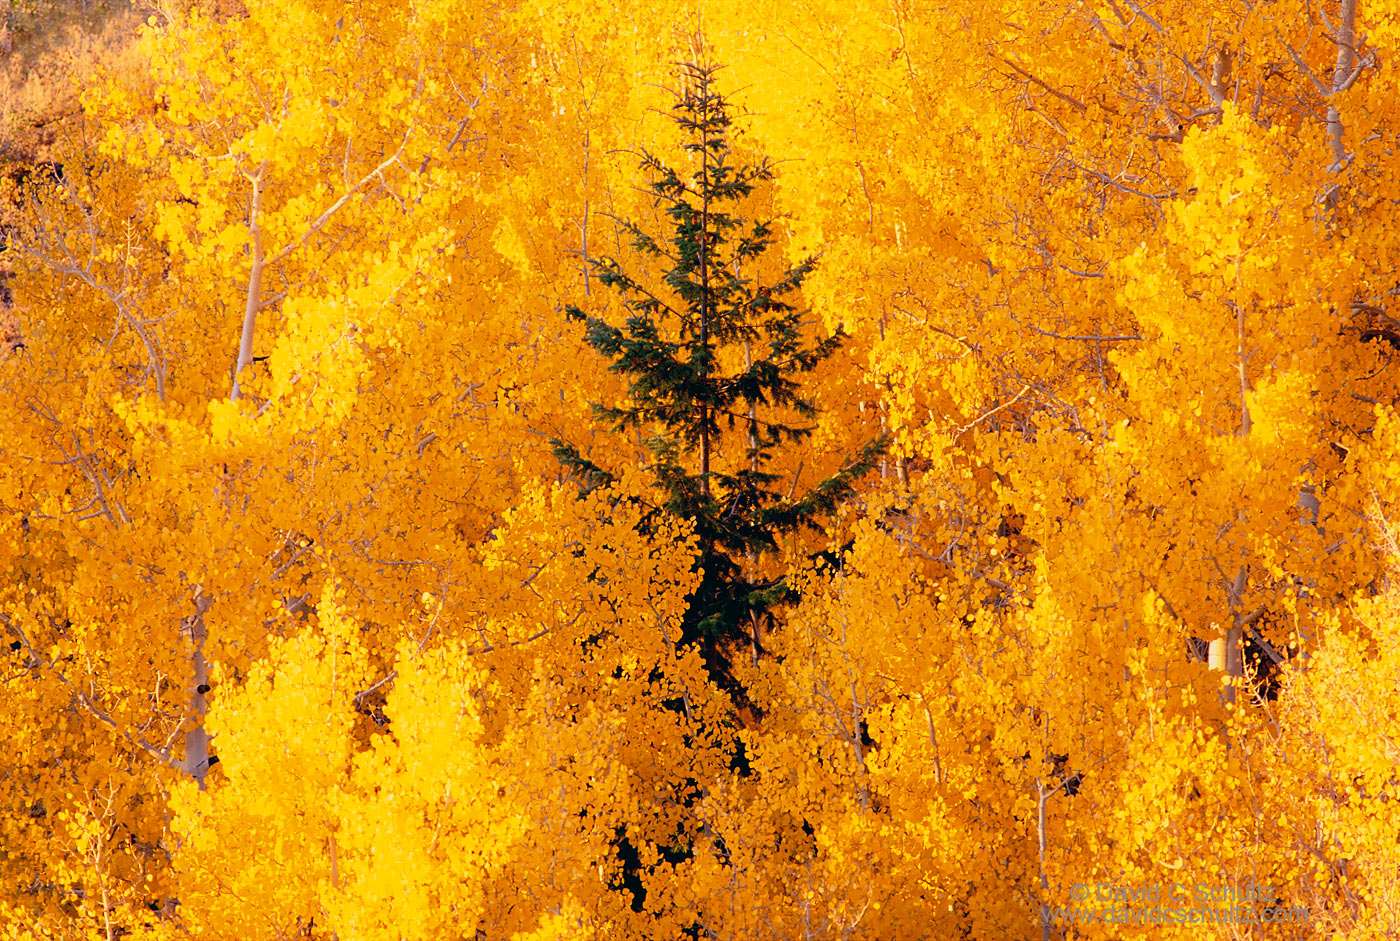 Park City Utah fall photo tour and lessons